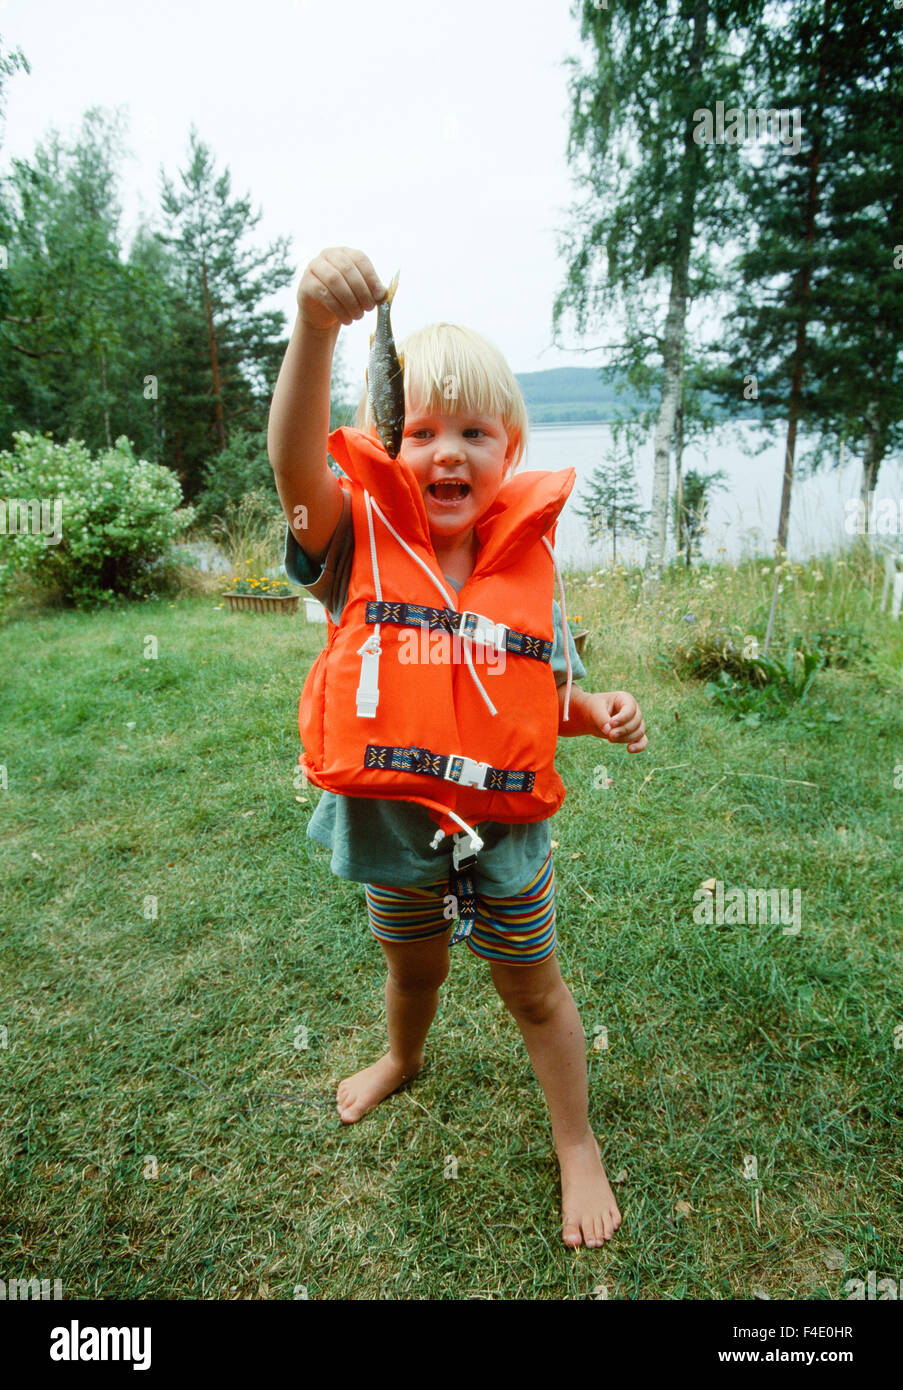 barefoot blonde capture casual clothing children only color image day  elementary age fisheries fishing girls grass happiness Stock Photo - Alamy